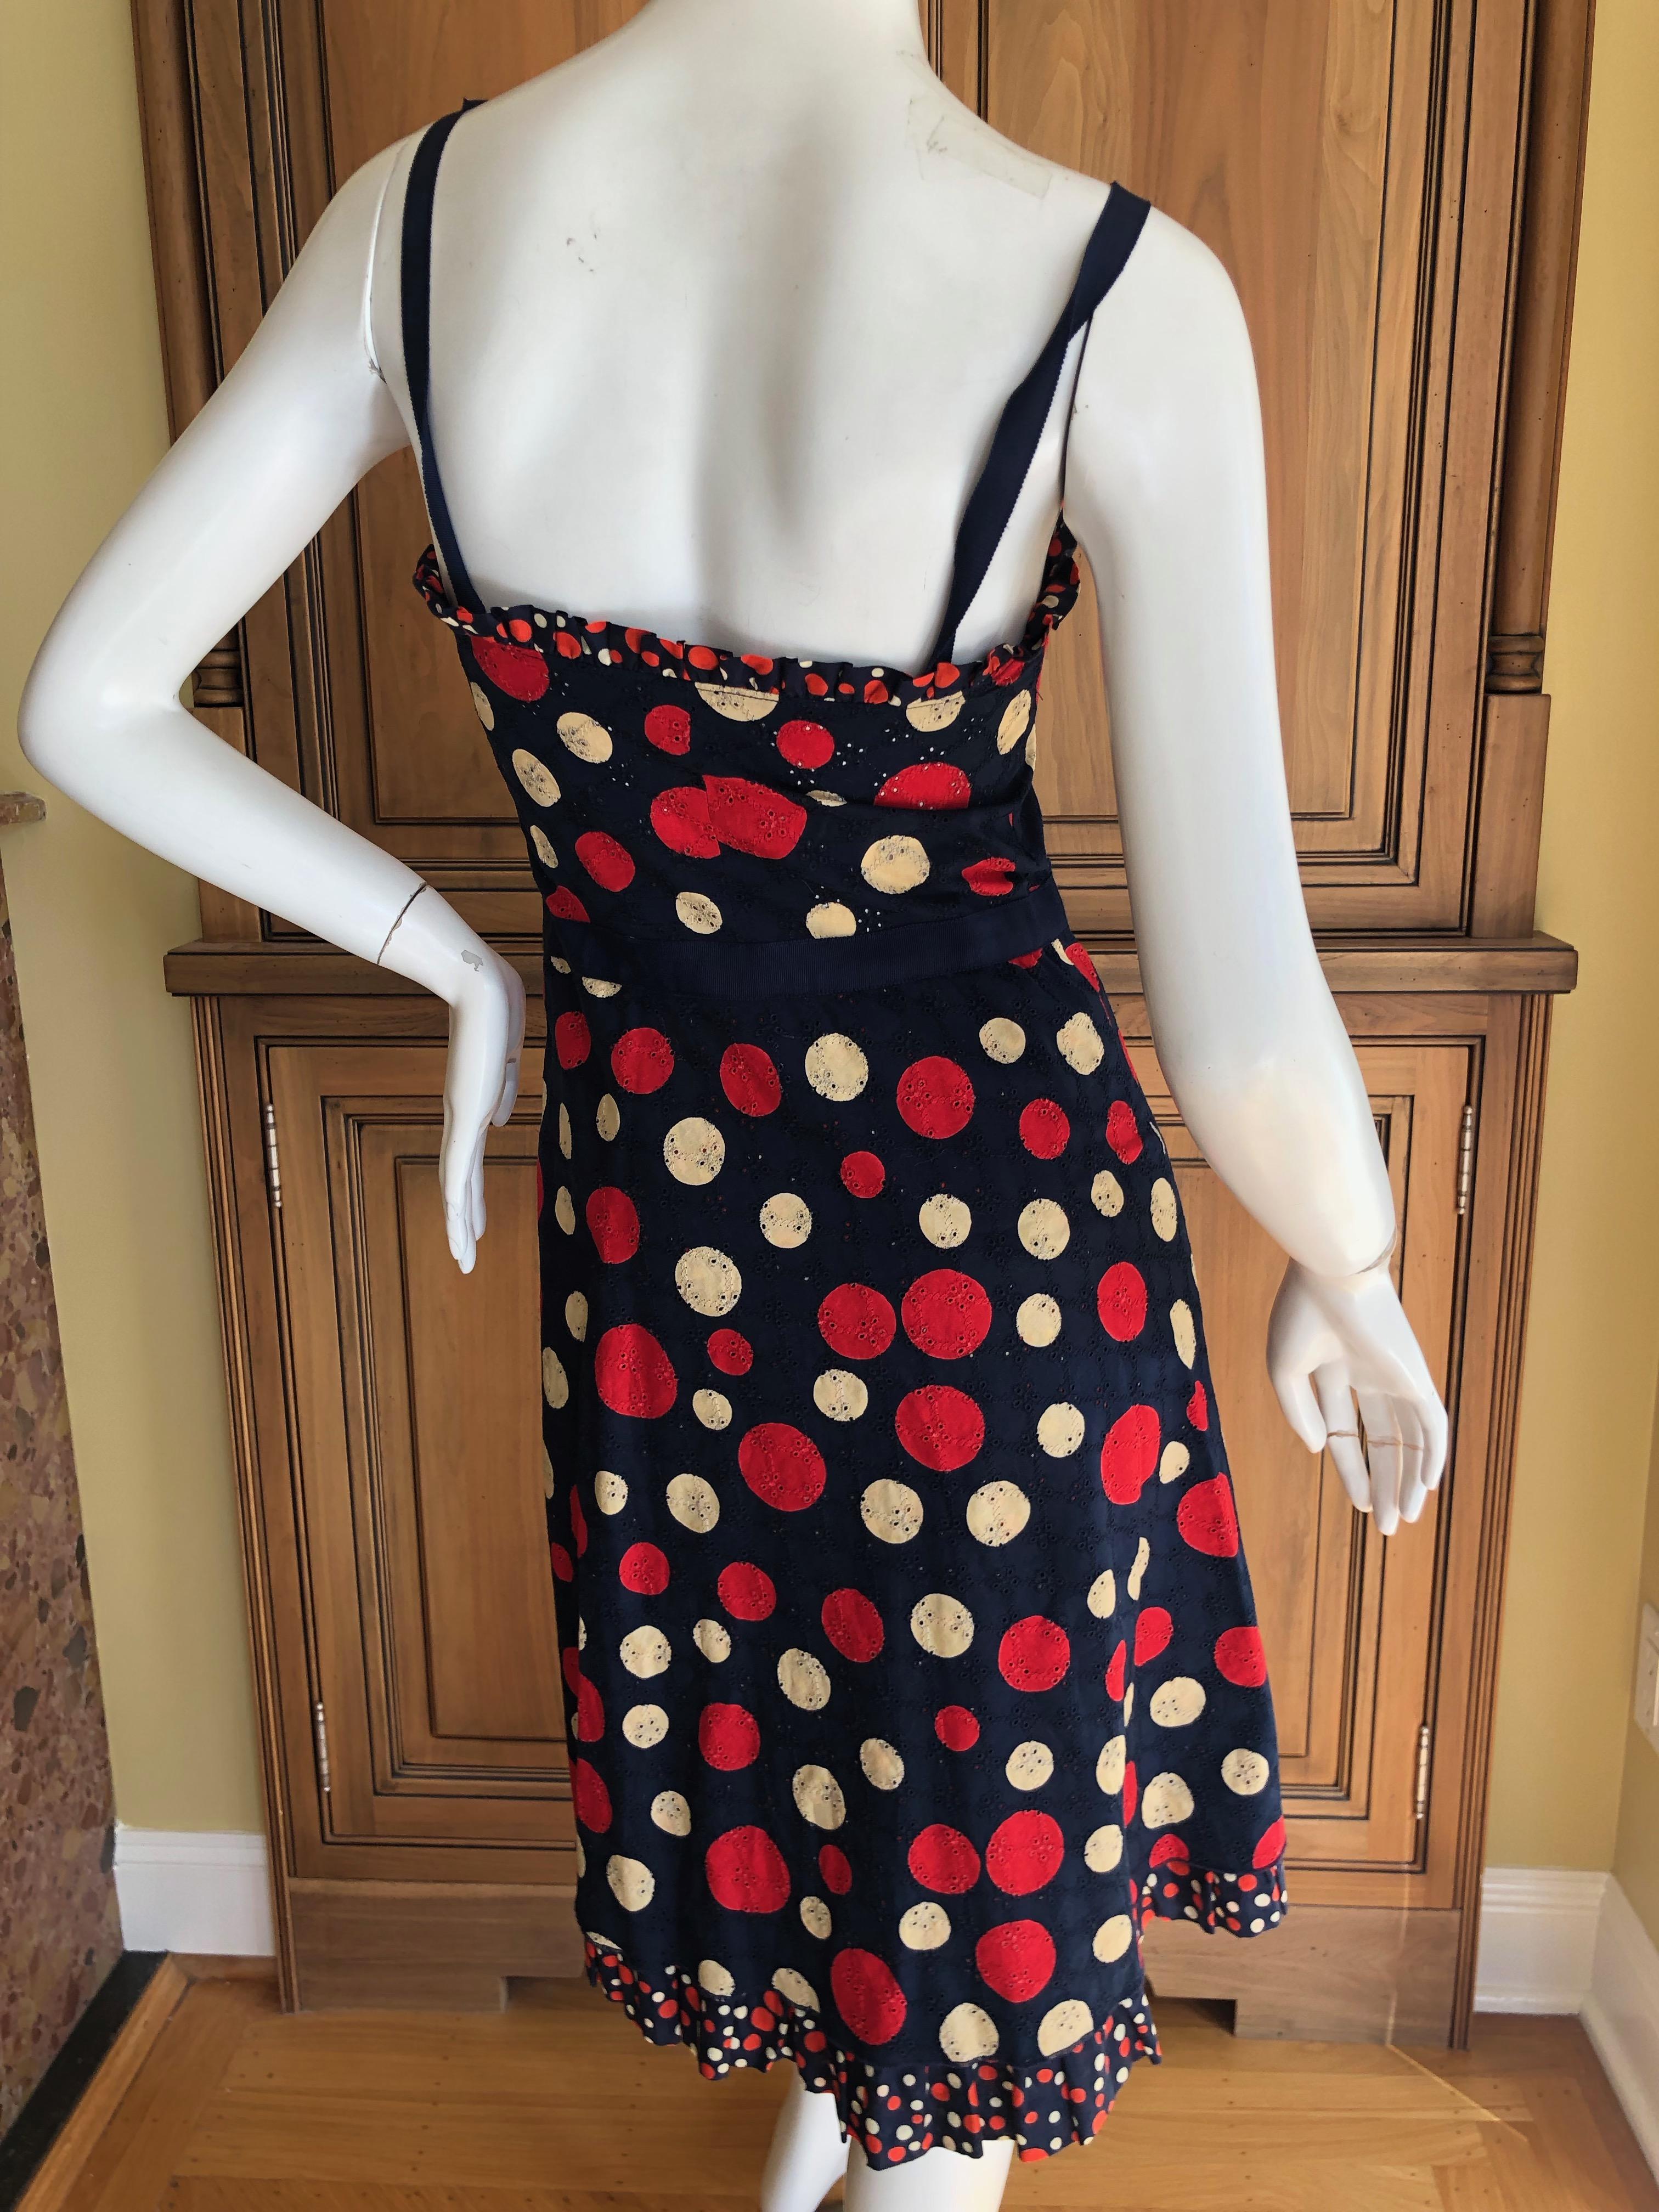 Moschino Cheap & Chic Vintage Polka Dot Dress in Navy Eyelet Cotton In Excellent Condition For Sale In Cloverdale, CA